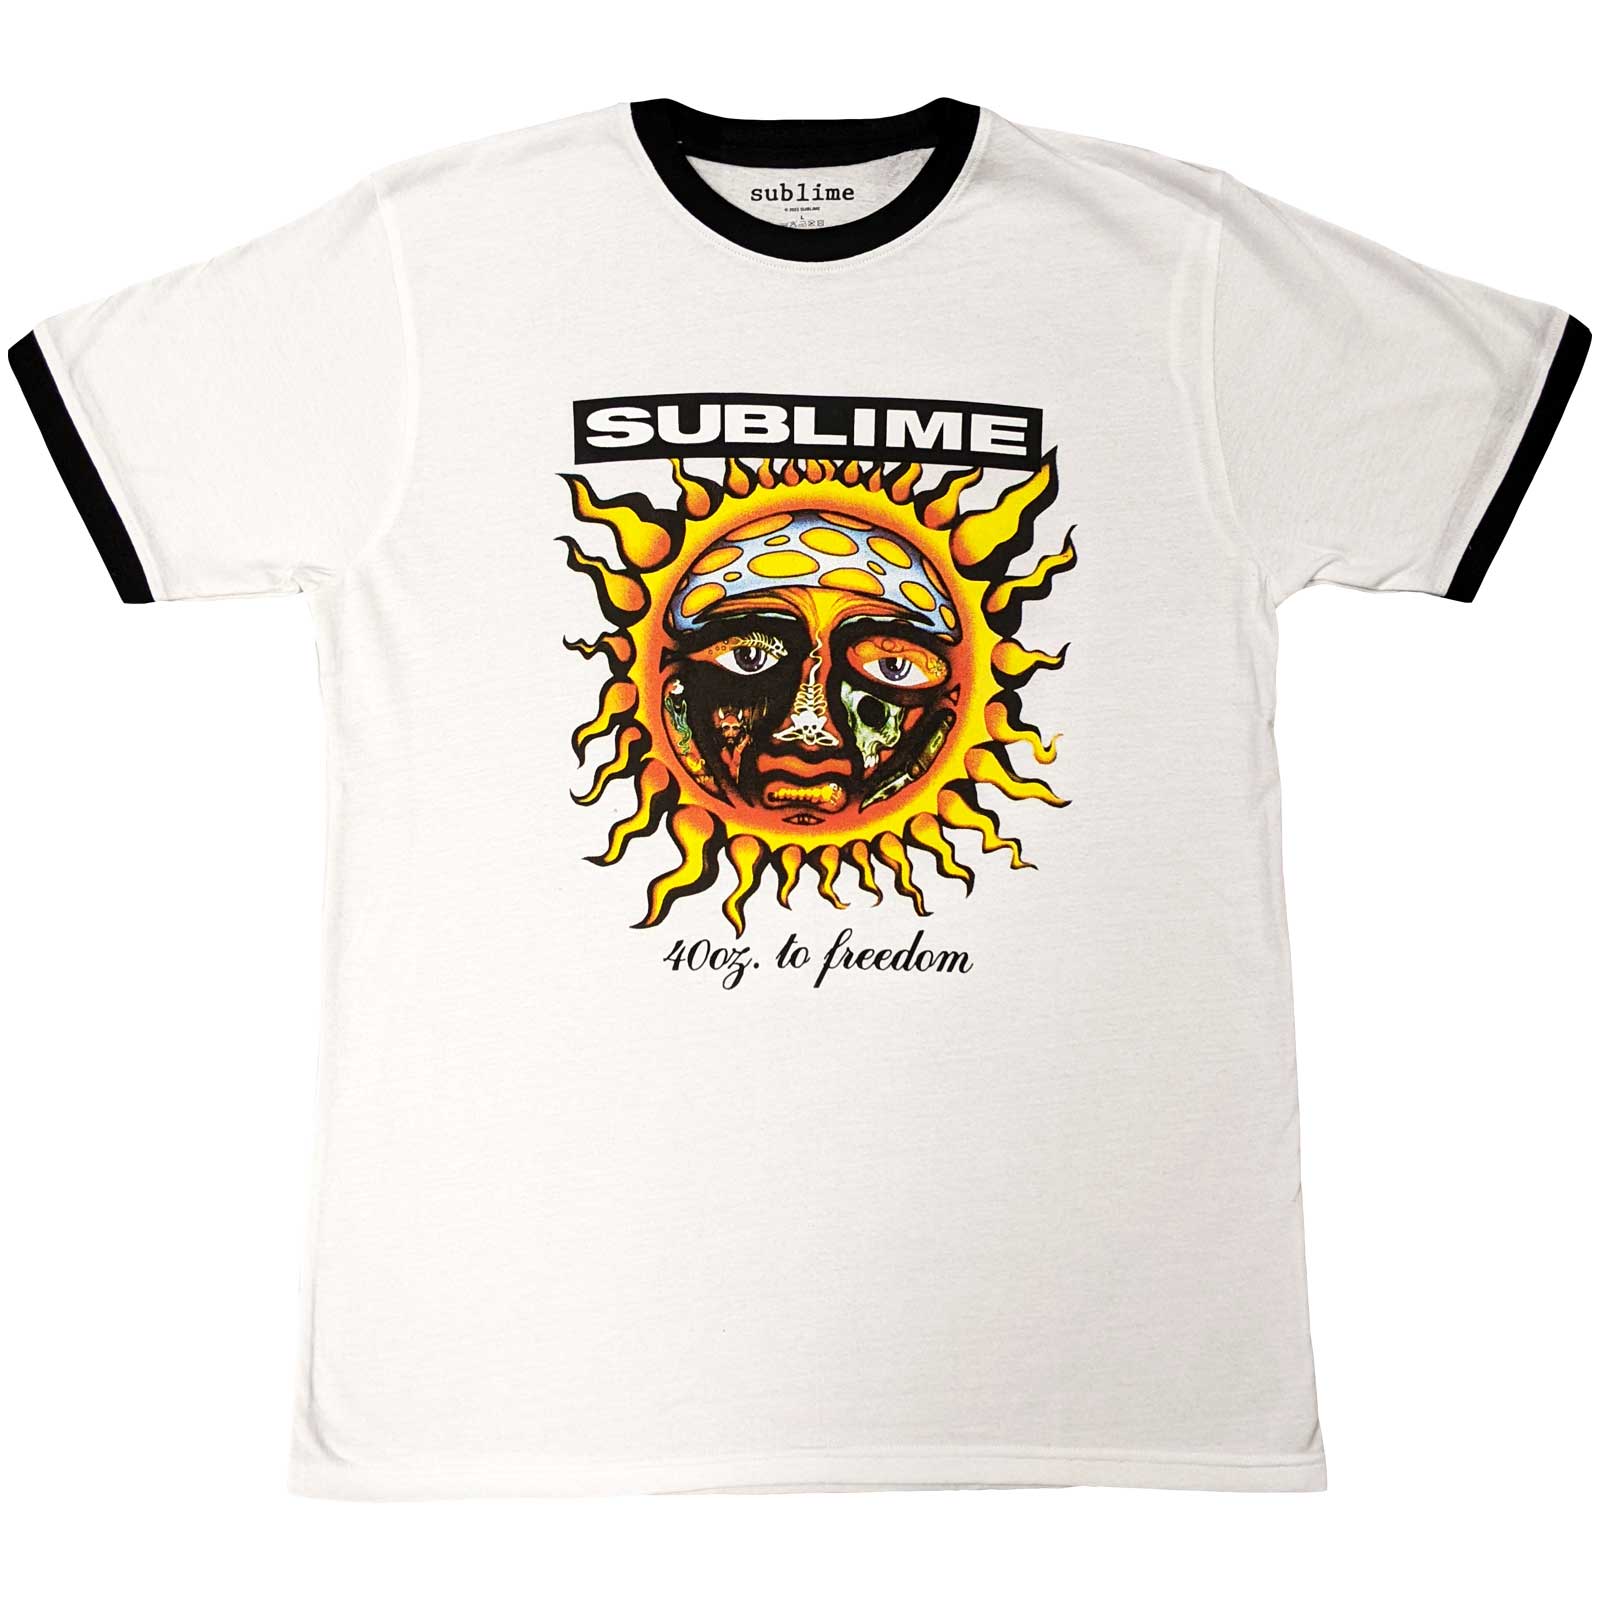 SUBLIME 40oz To Freedom